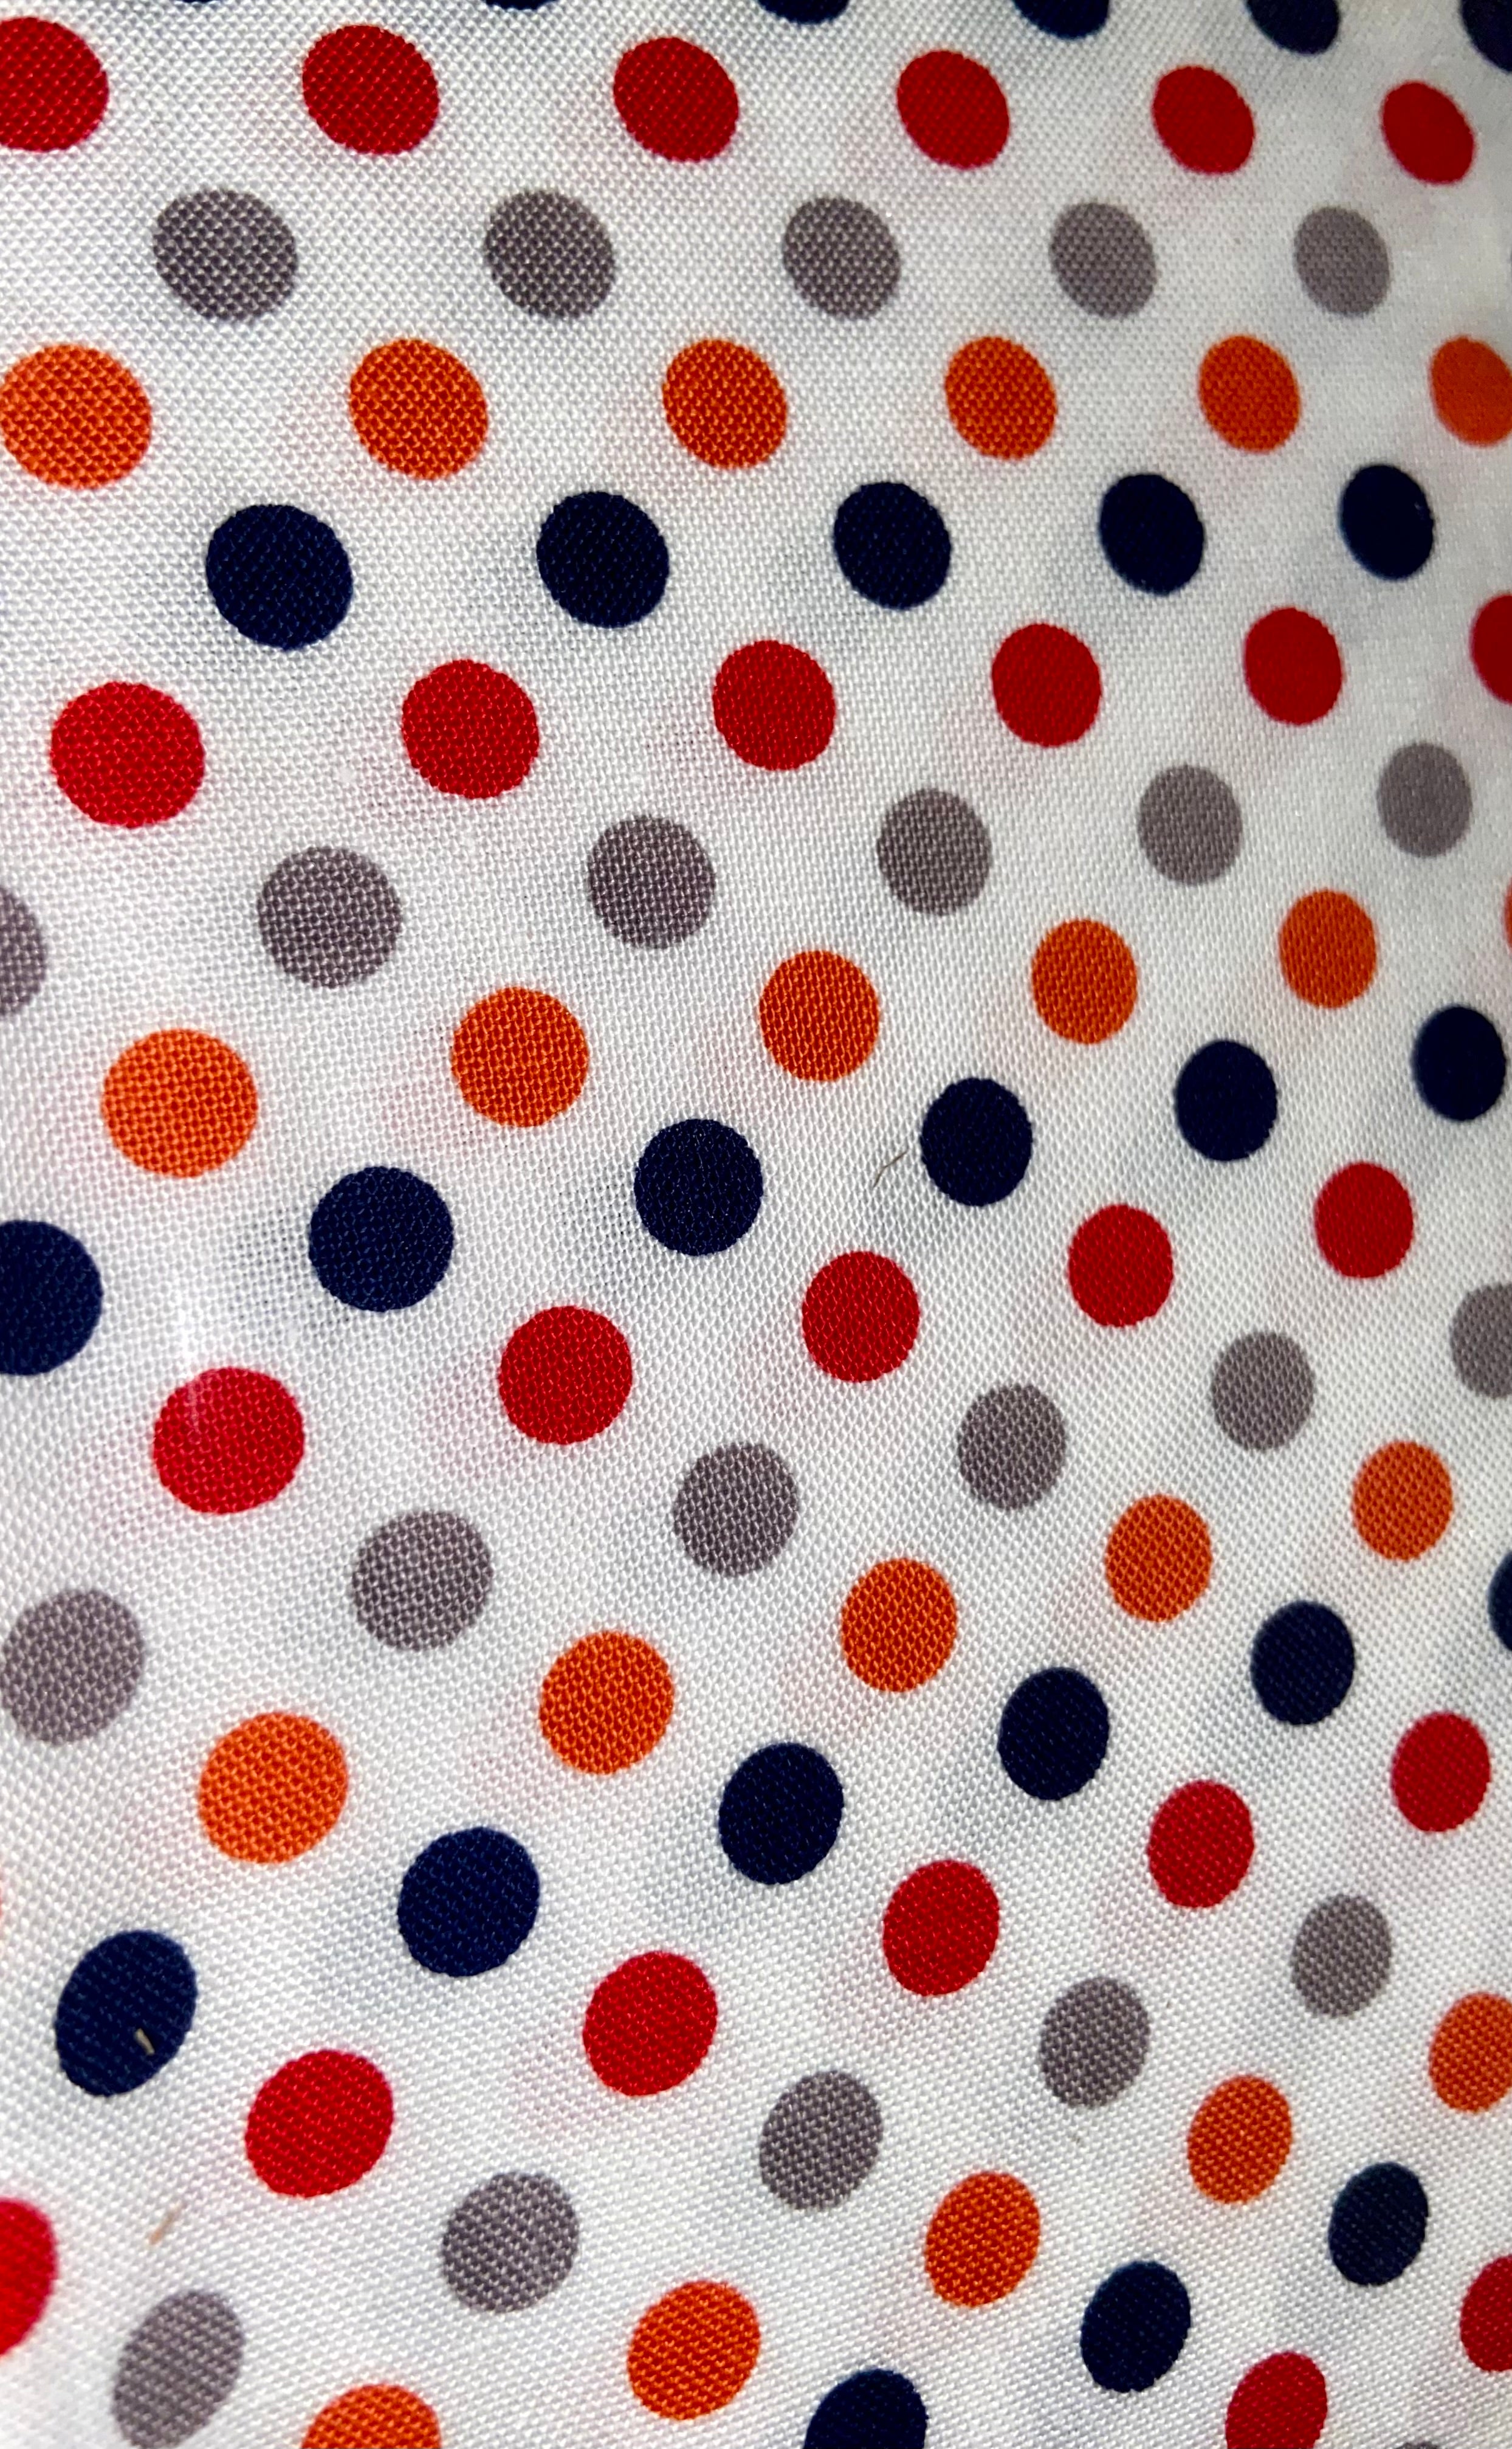 Small Dots Boy - Colored Polka Dots - White Background Fabric, 100% Cotton, Ref. C350-02 BOY, Small Dot Collection by Riley Blake Designs®